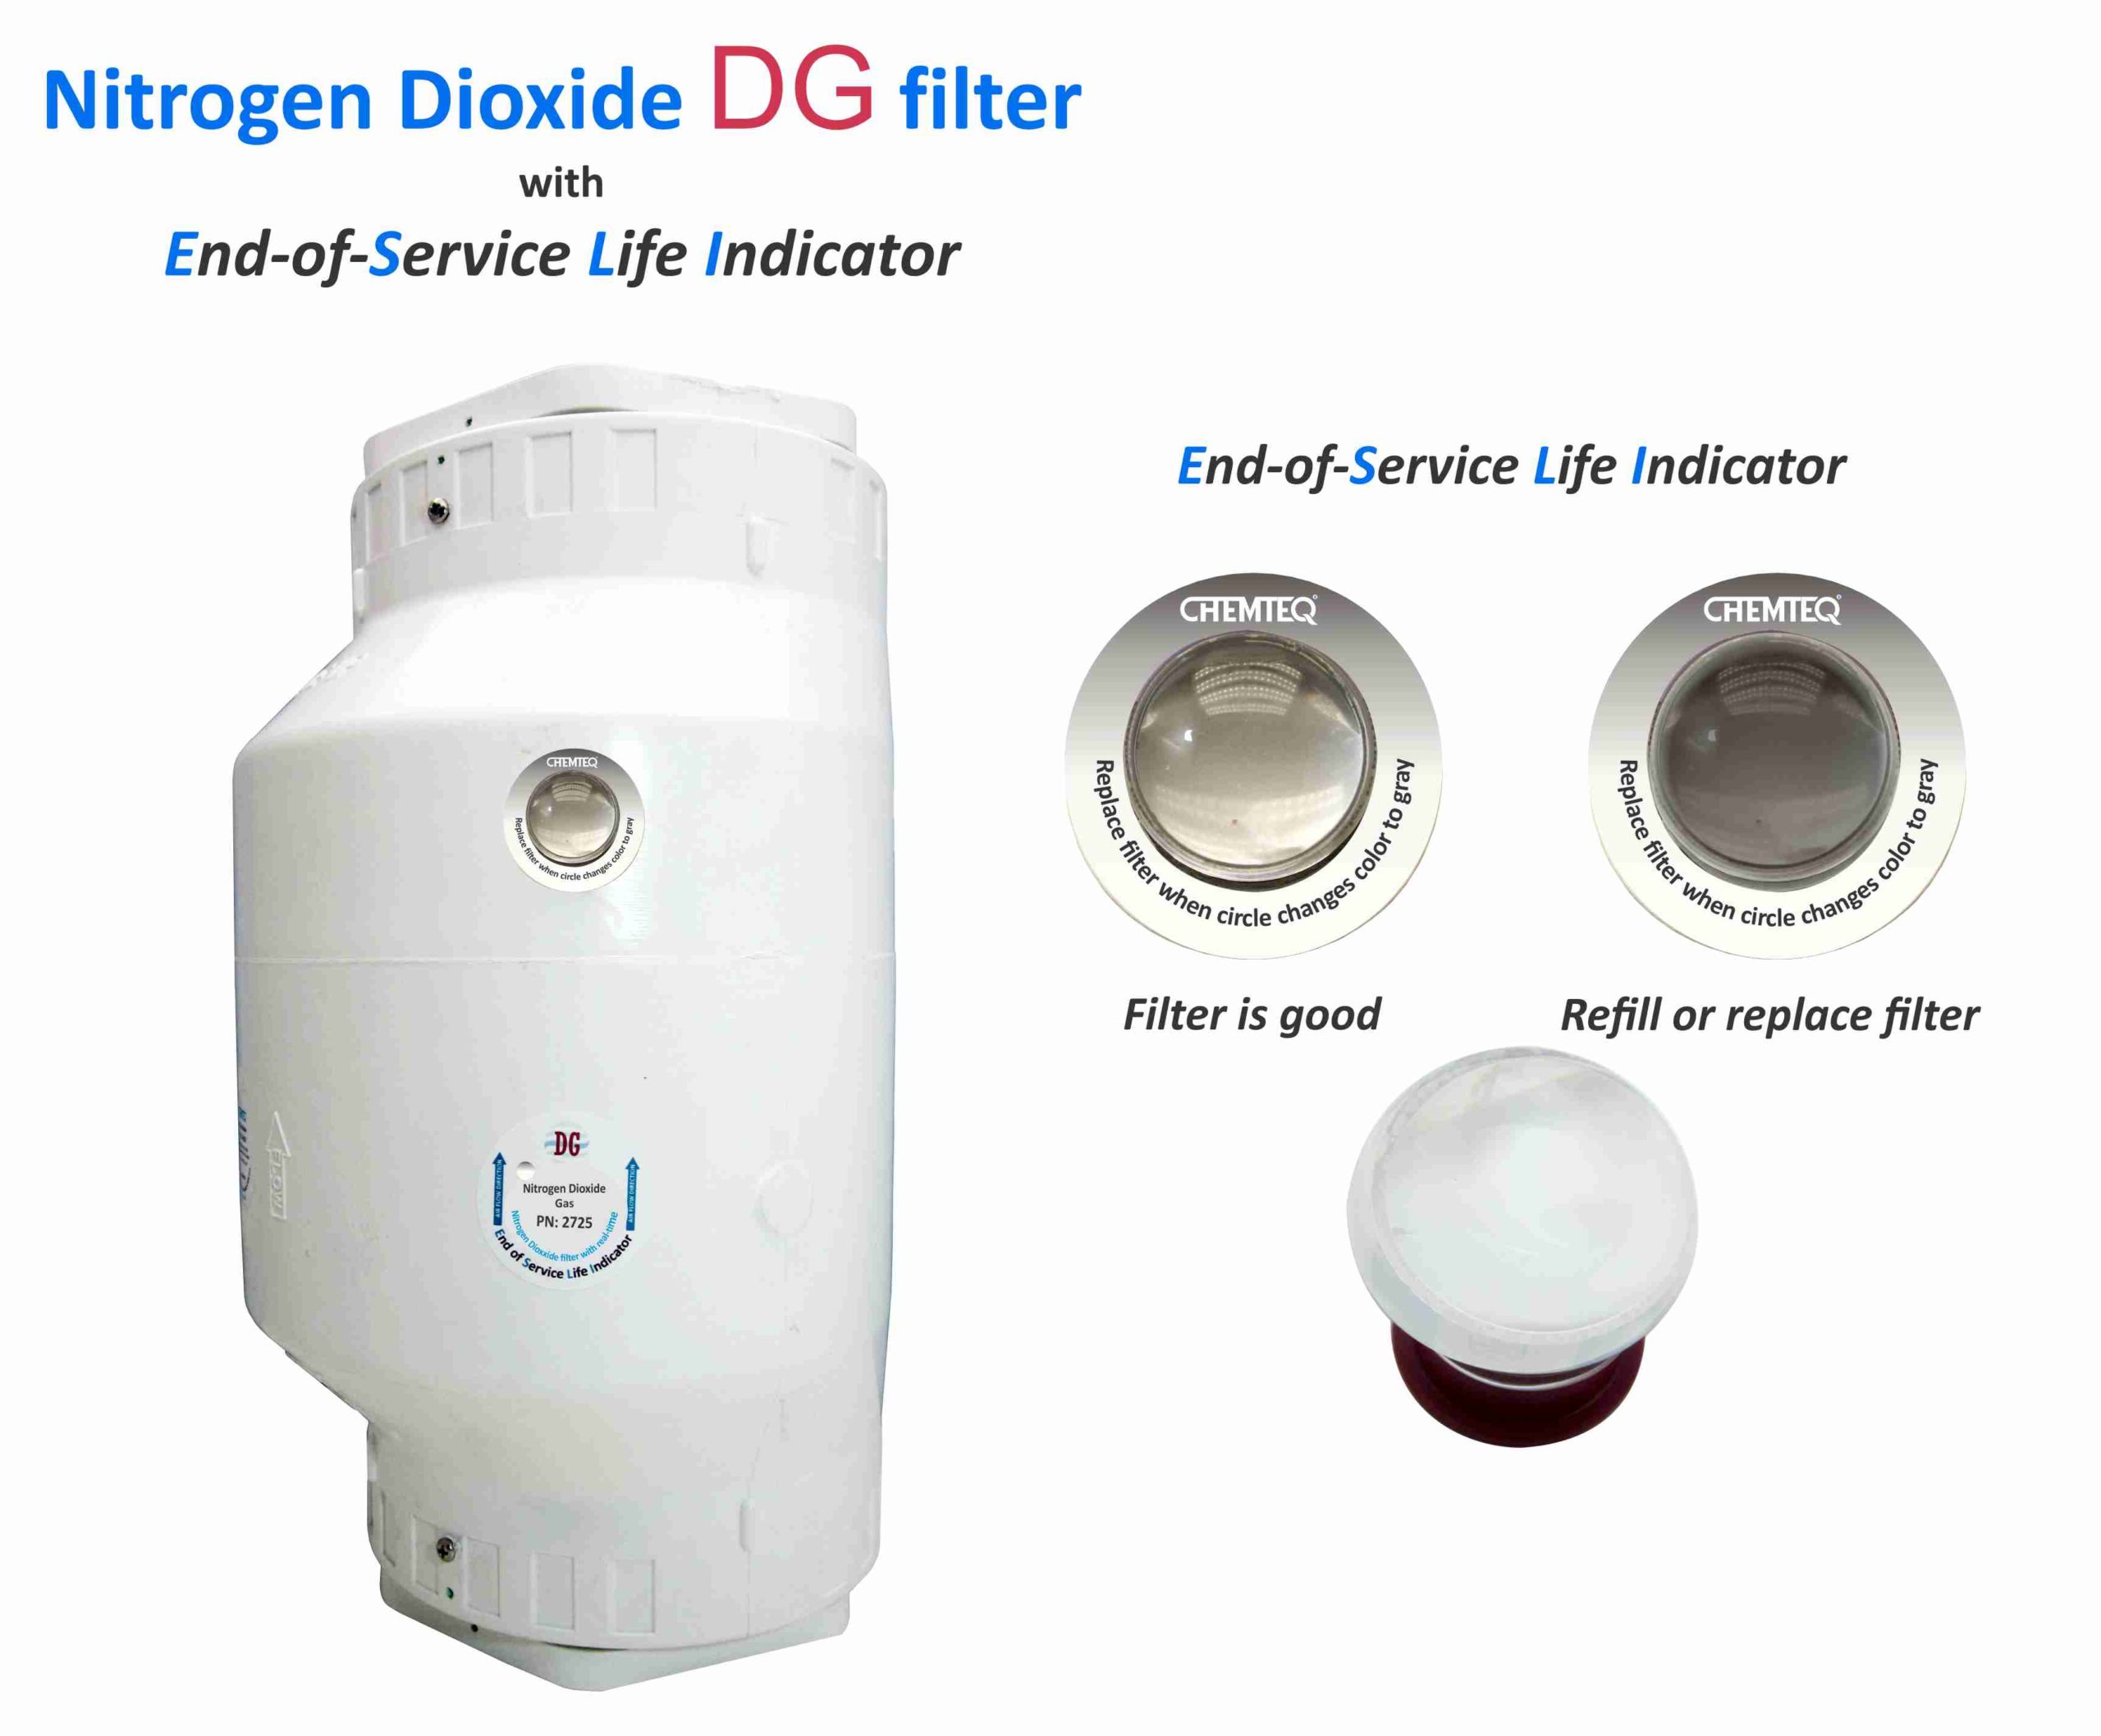 Nitrogen Dioxide DG FILTER-ESLI-2725. Filter with end of service life indicator. Suitable for chemical processes and reactor vents